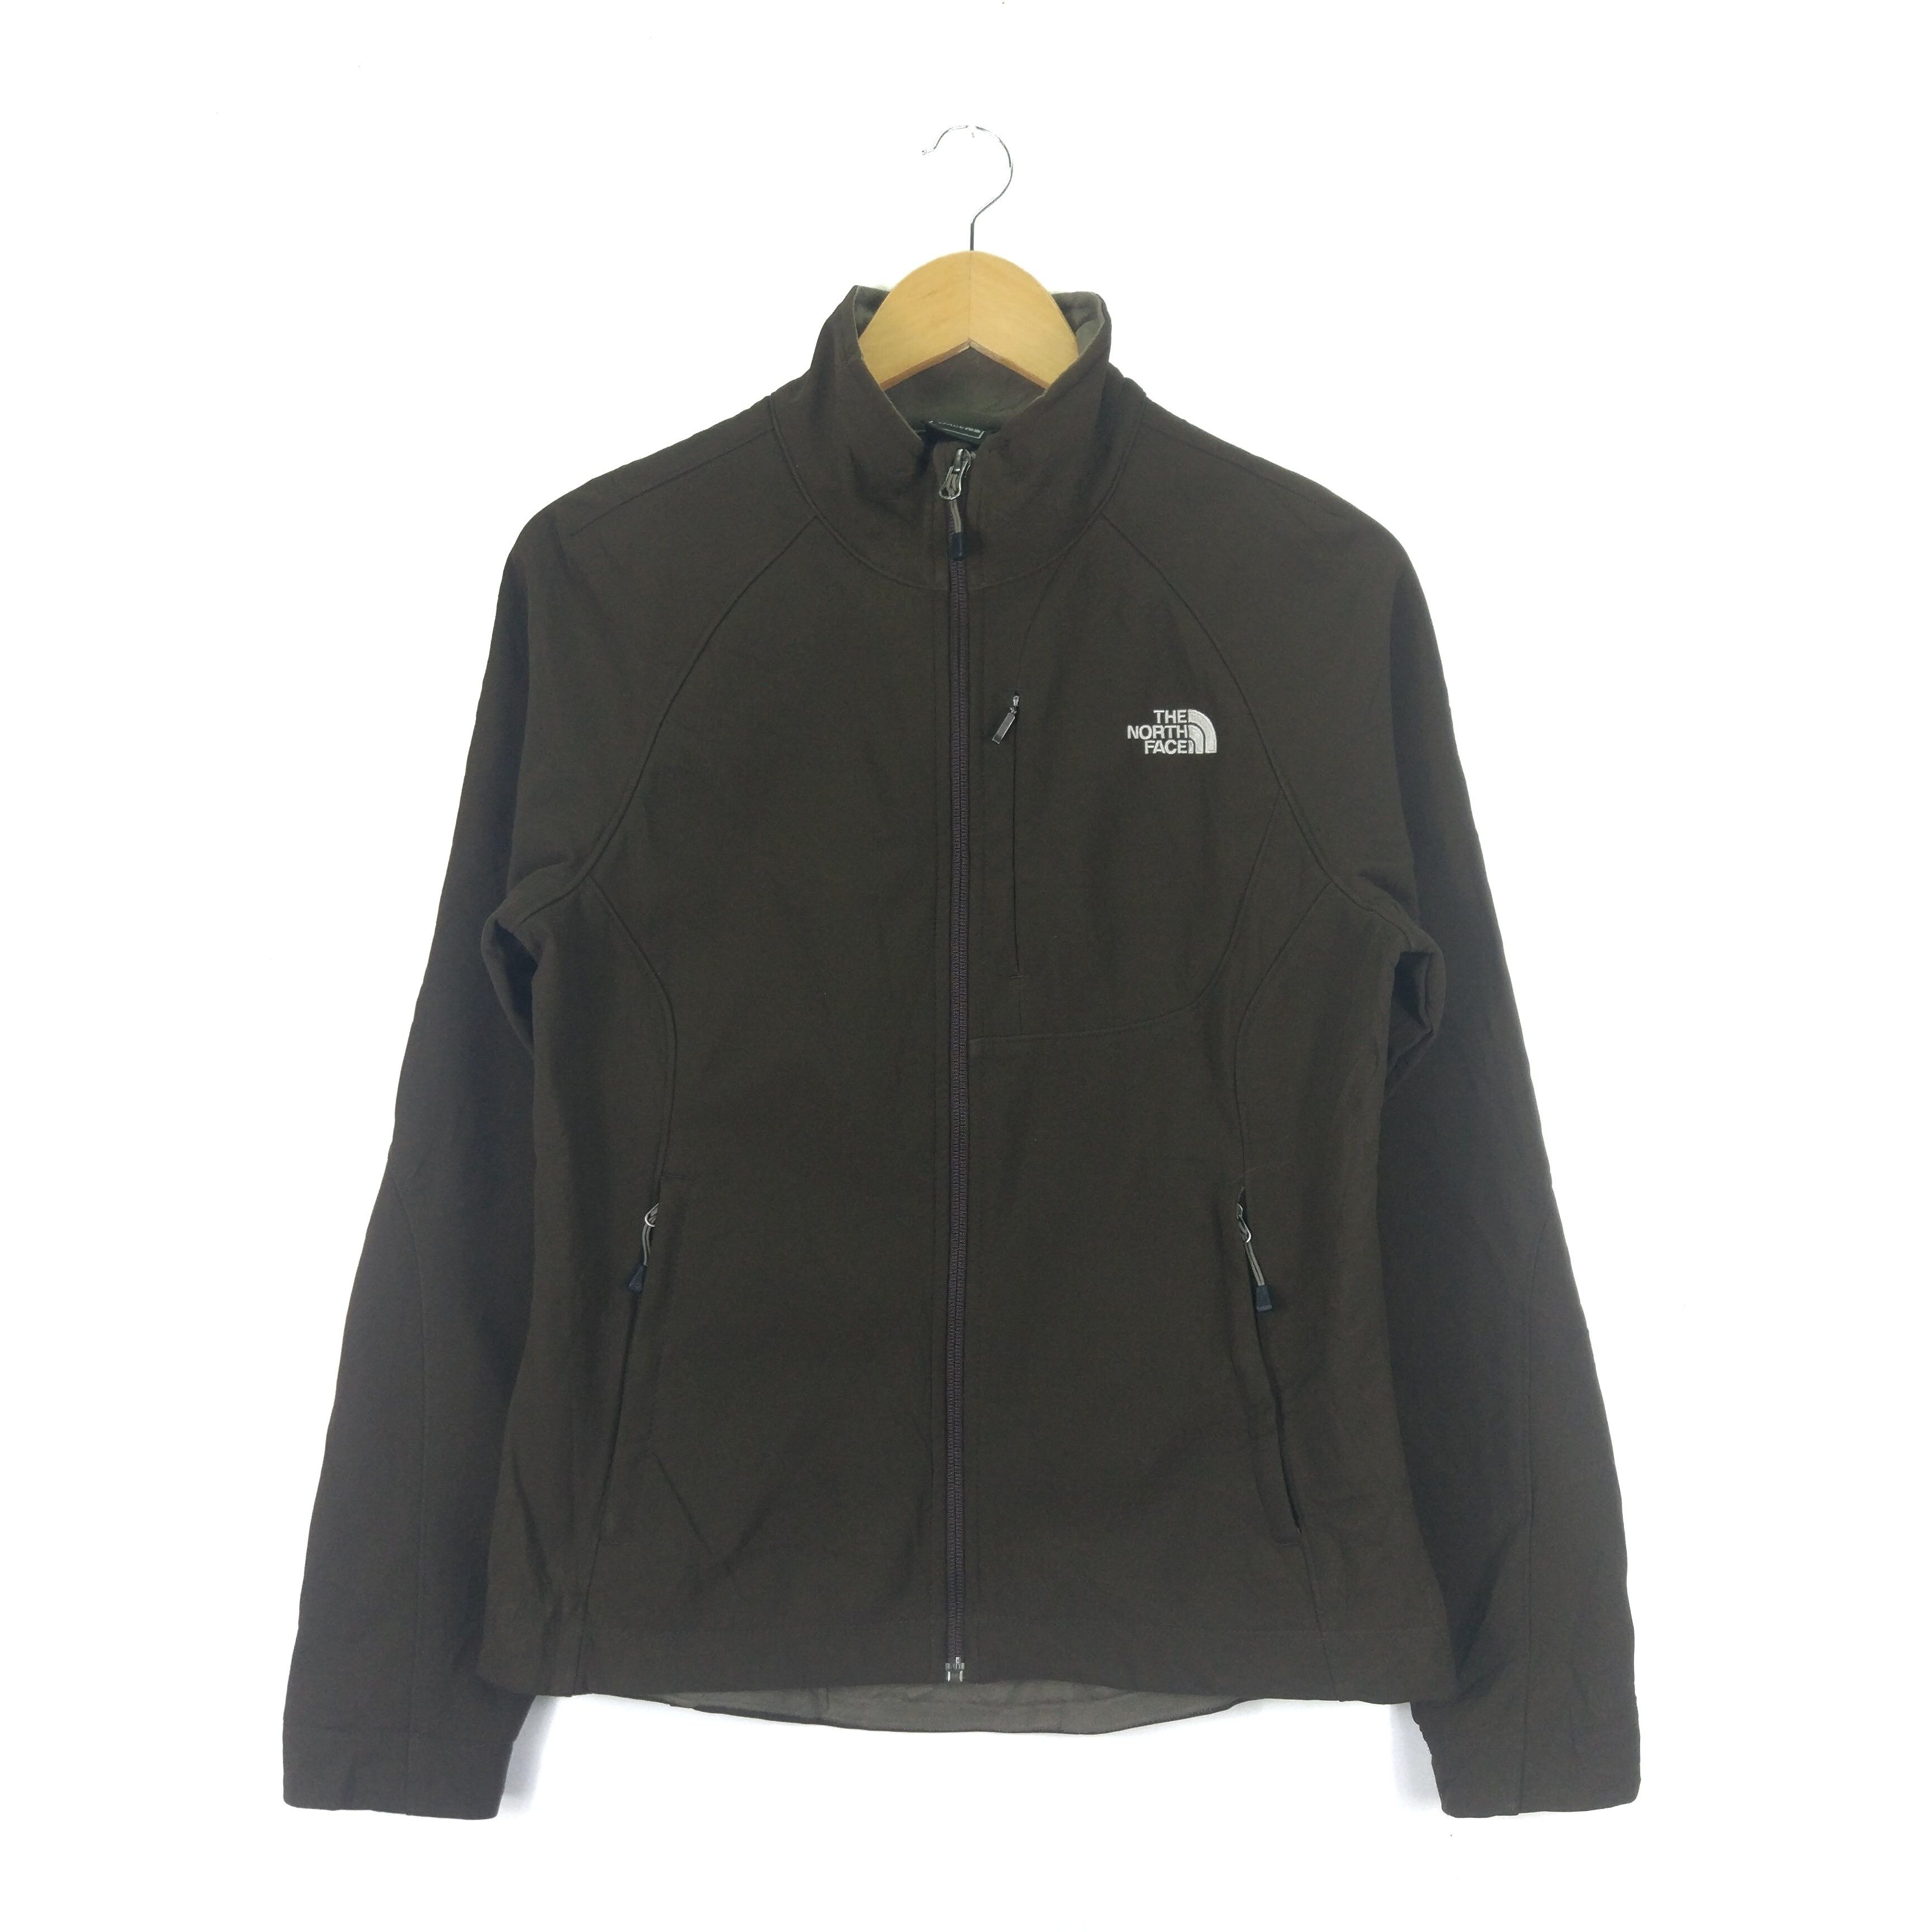 The North Face Embroidery Logo Zip Up Coats Jacket - 1